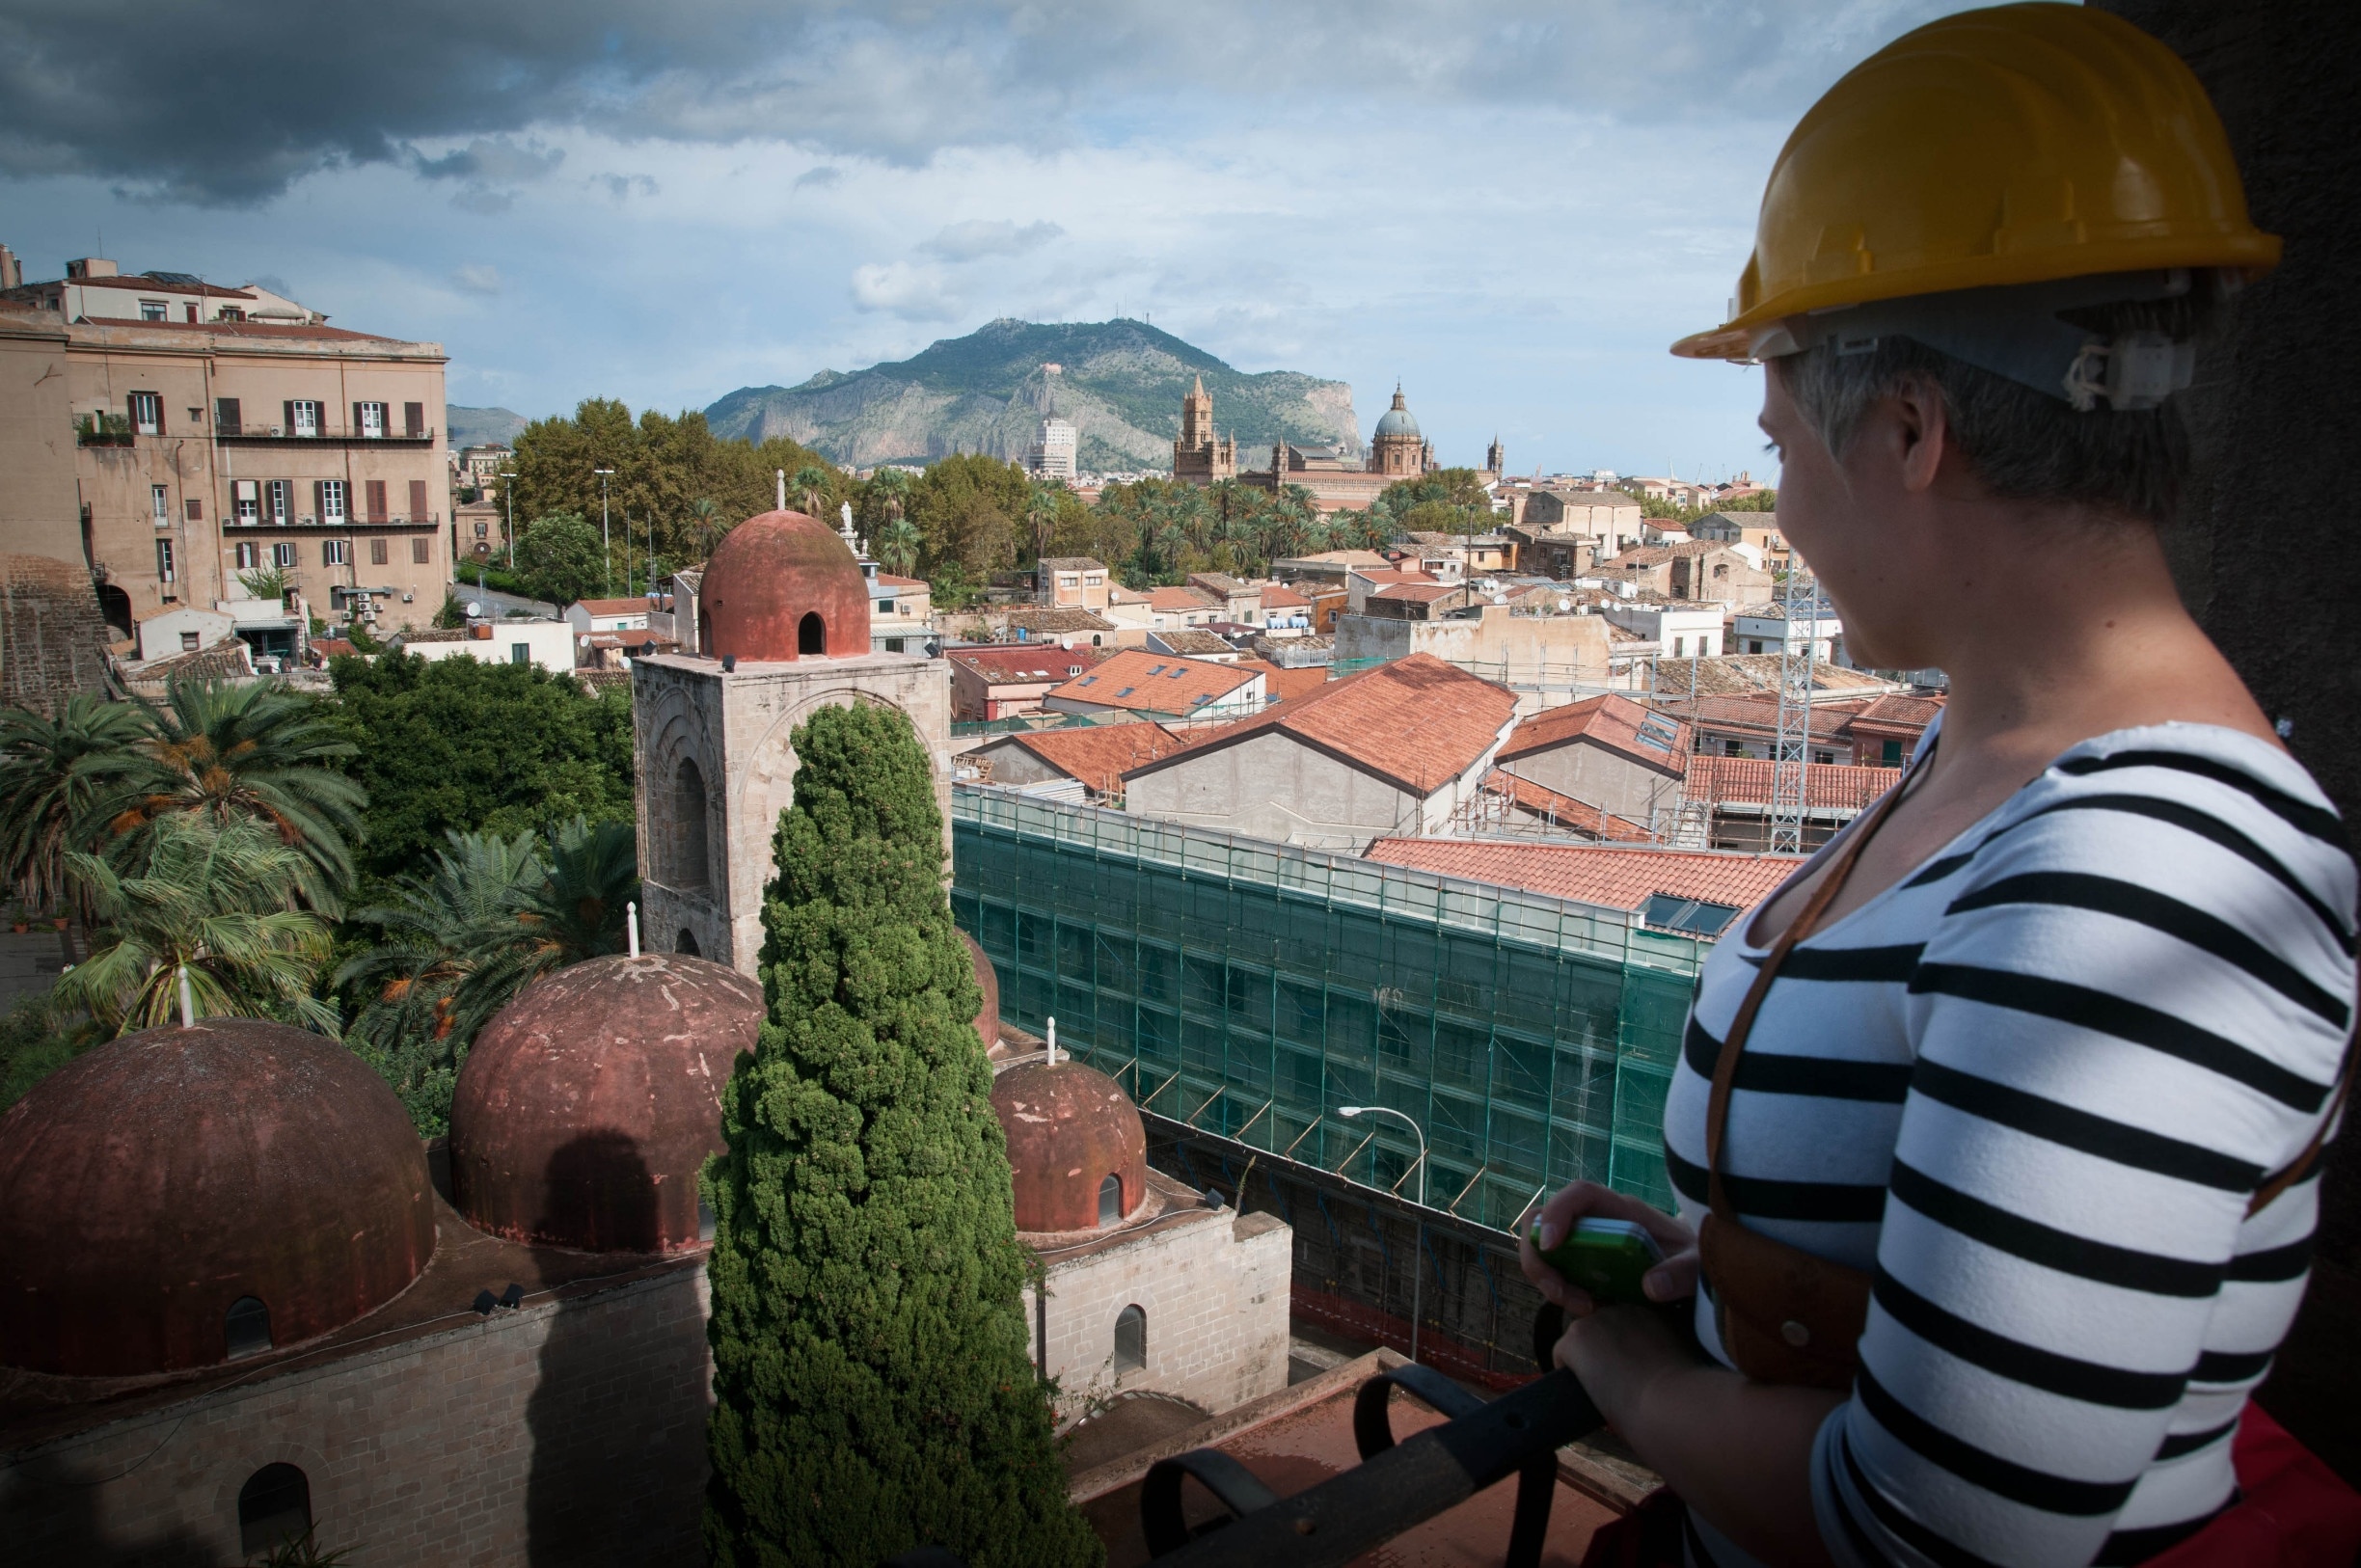 The best views over magnificent Palermo are from the bell tower of the church [and I'm talking here about the best way I could have spent 2 EUR!]. 
You must wear a helmet, which ends up as a very stylish accessory. 